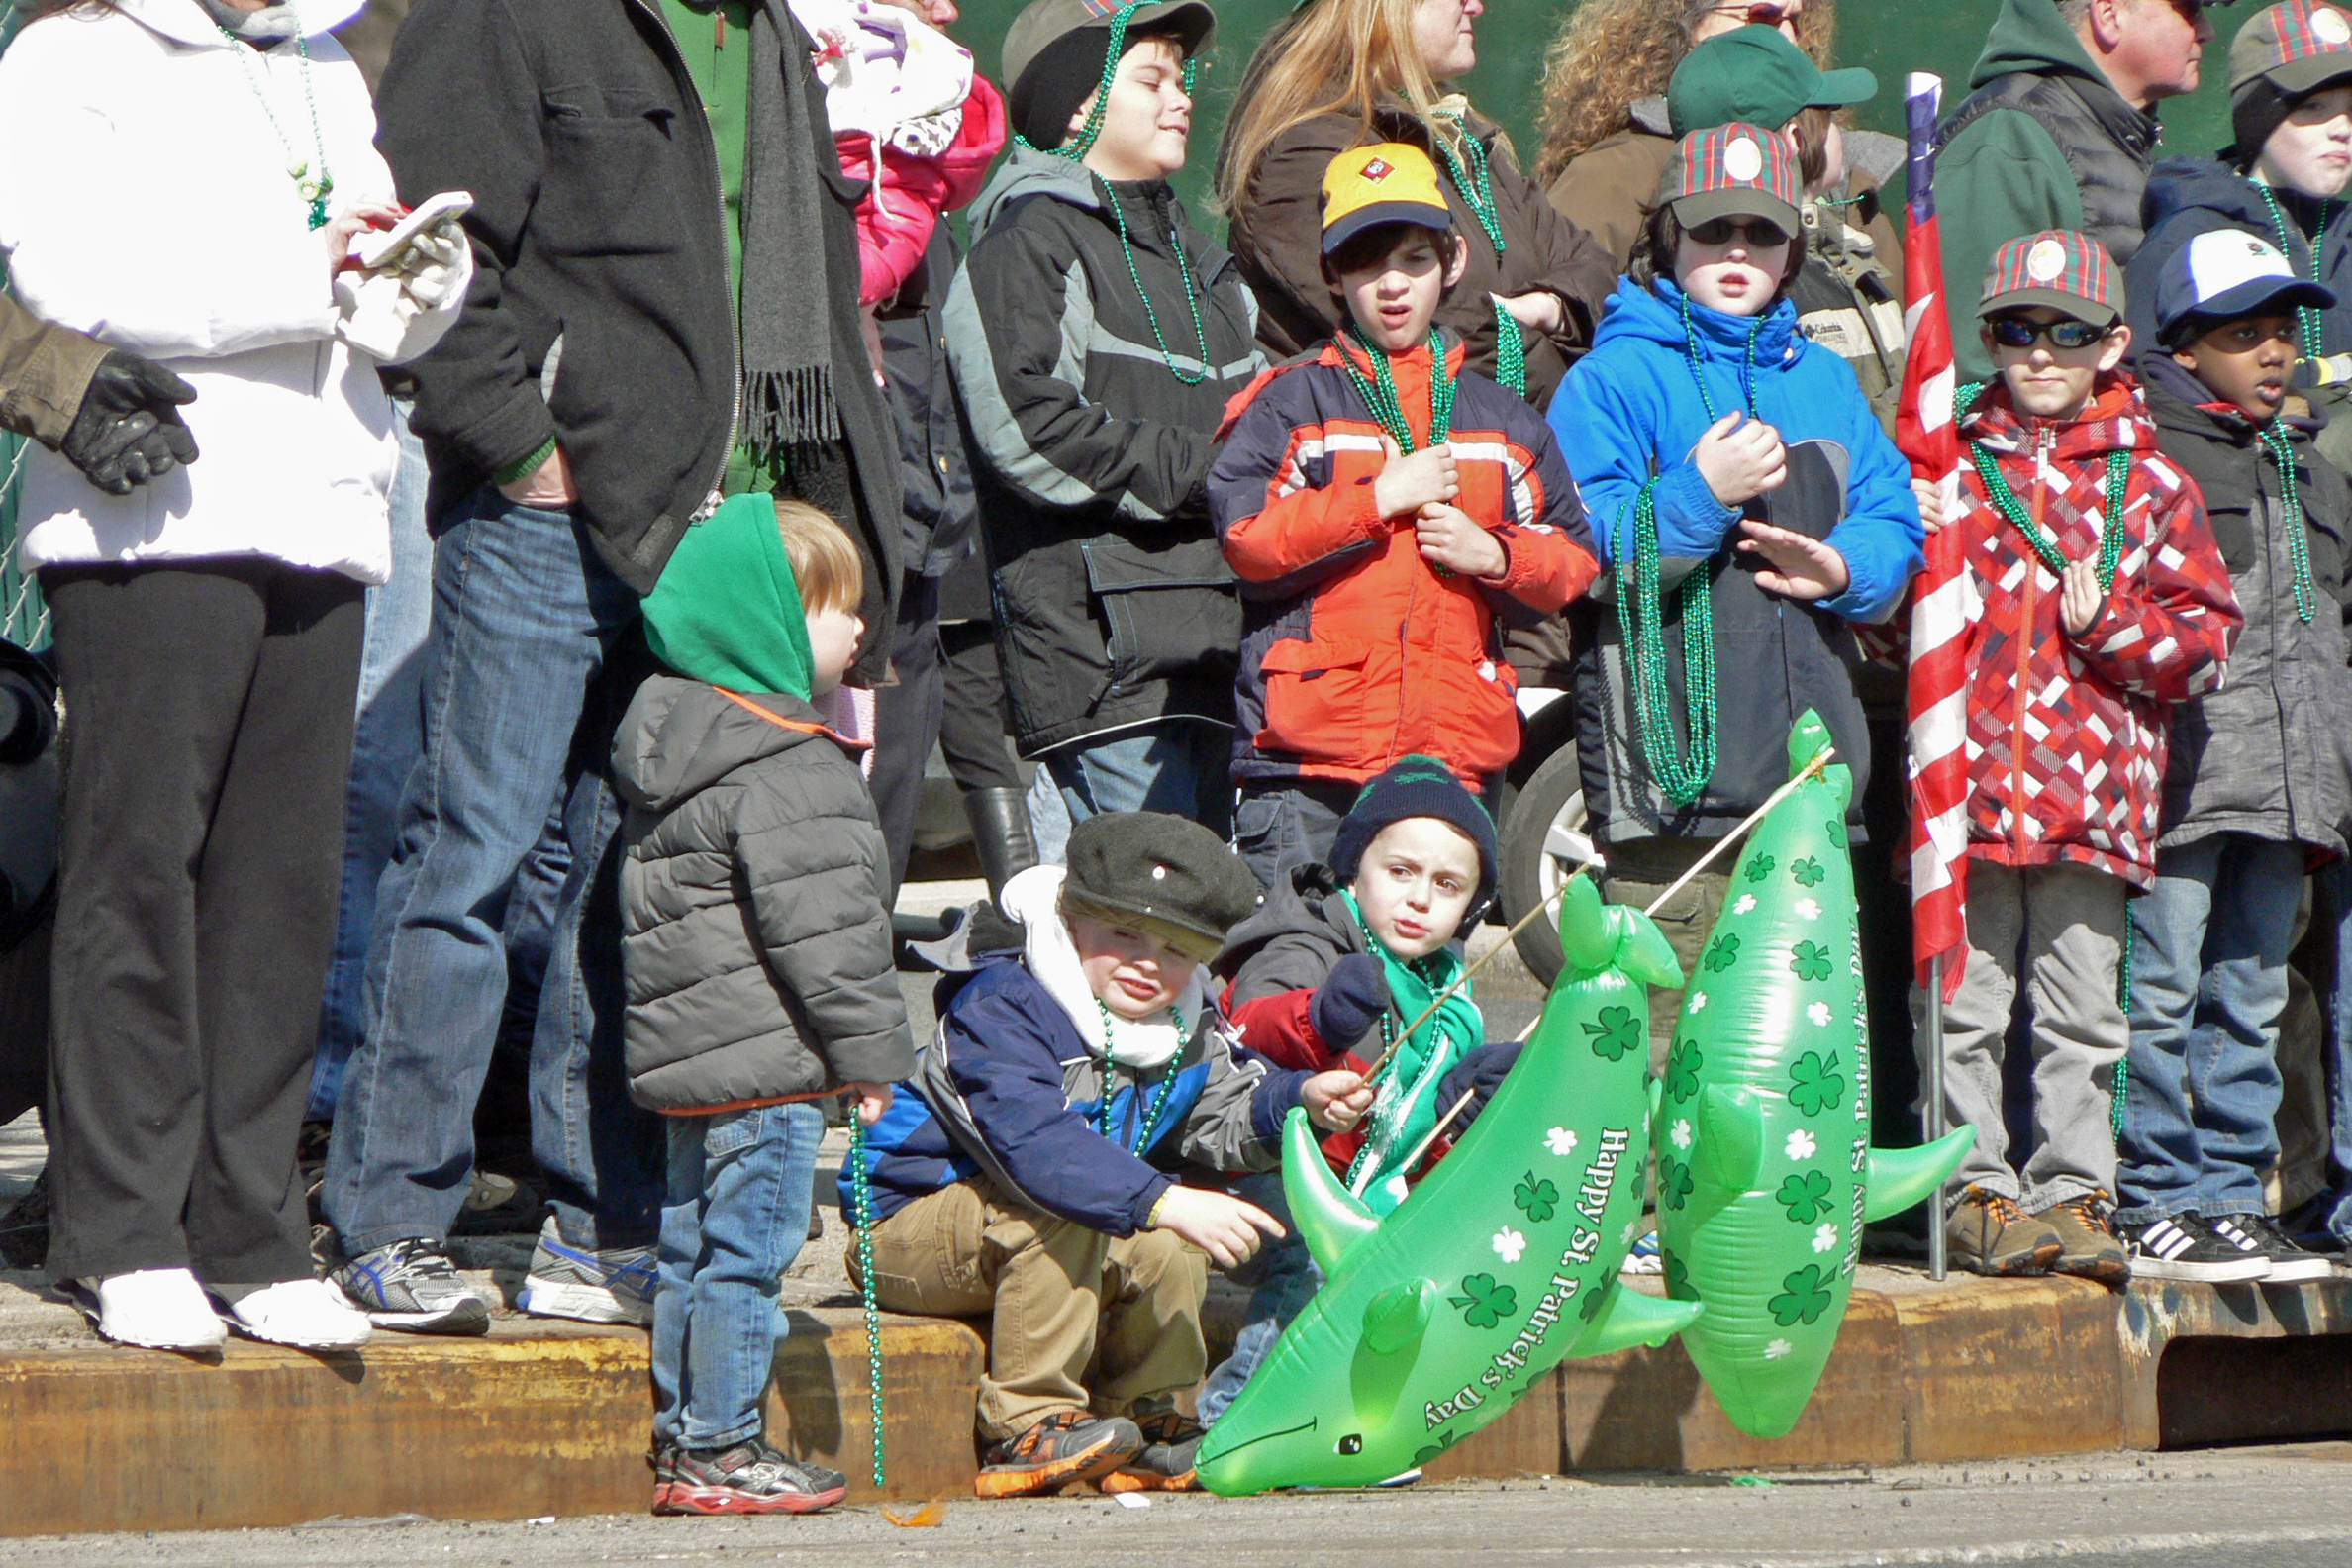 St. Pat’s 2014 – Start the Parade!